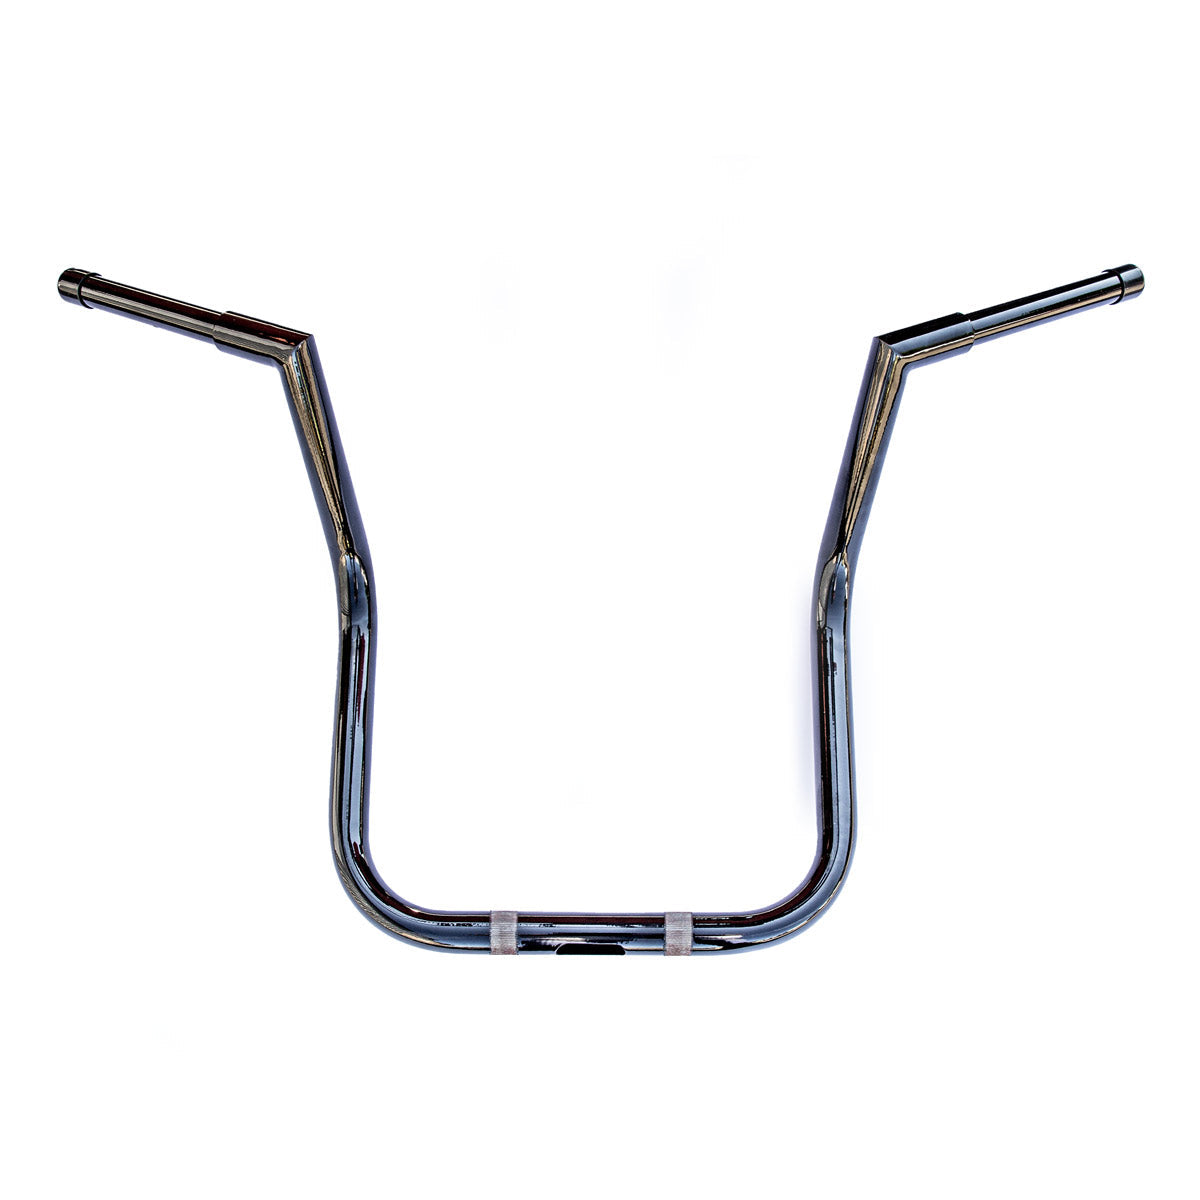 12" Black Ergo Bars for 2018-2020 Indian® Chieftain, Roadmaster and Dark Horse Motorcycles(12" Black)